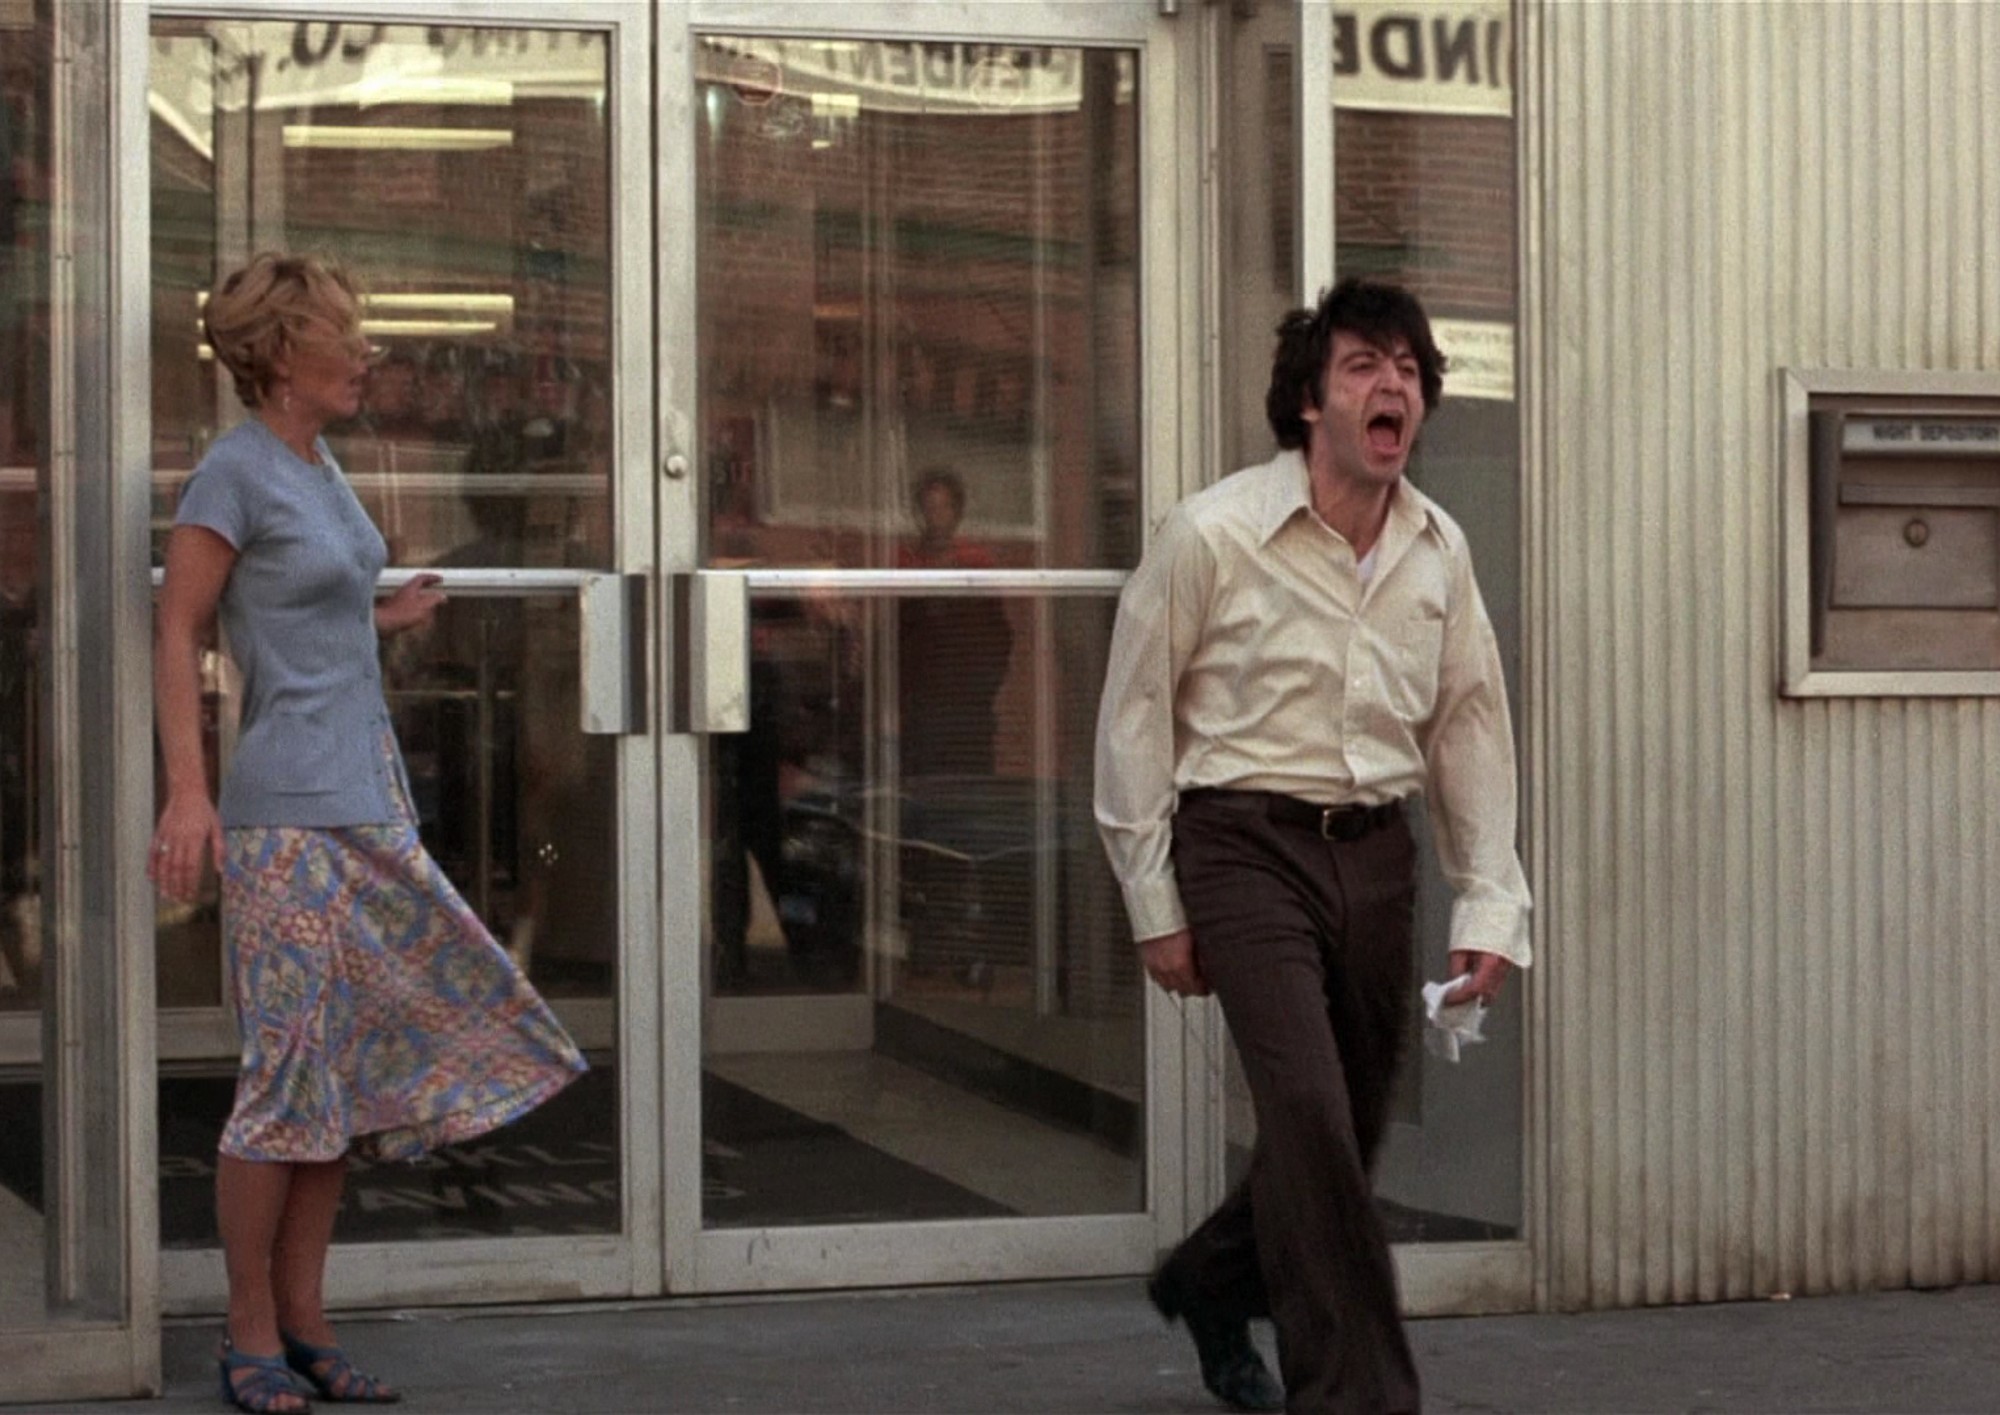 Image from the motion picture Dog Day Afternoon